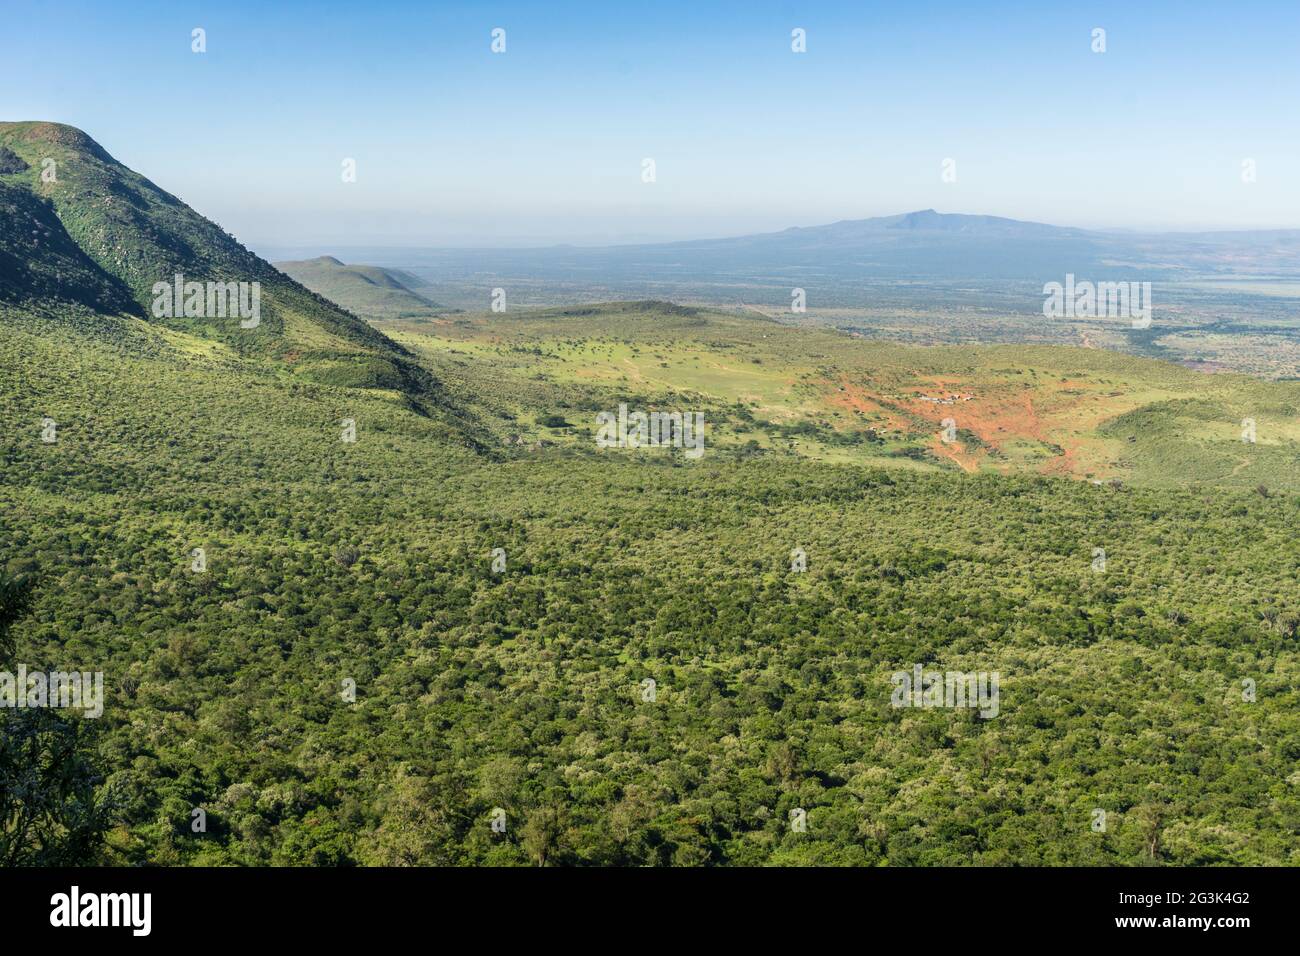 The Great Rift Valley Stock Photo